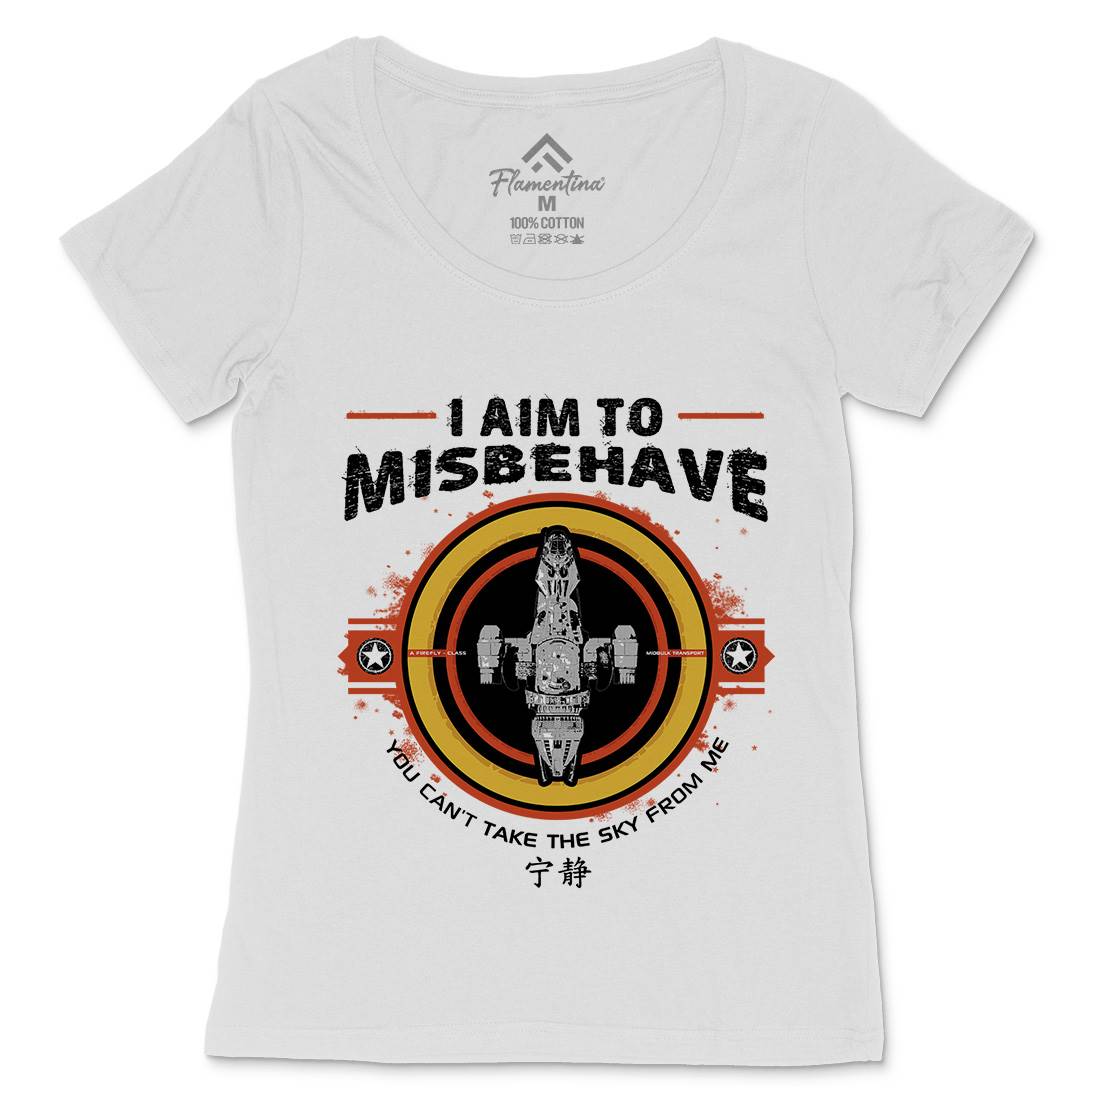 I Aim To Misbehave Womens Scoop Neck T-Shirt Space D352